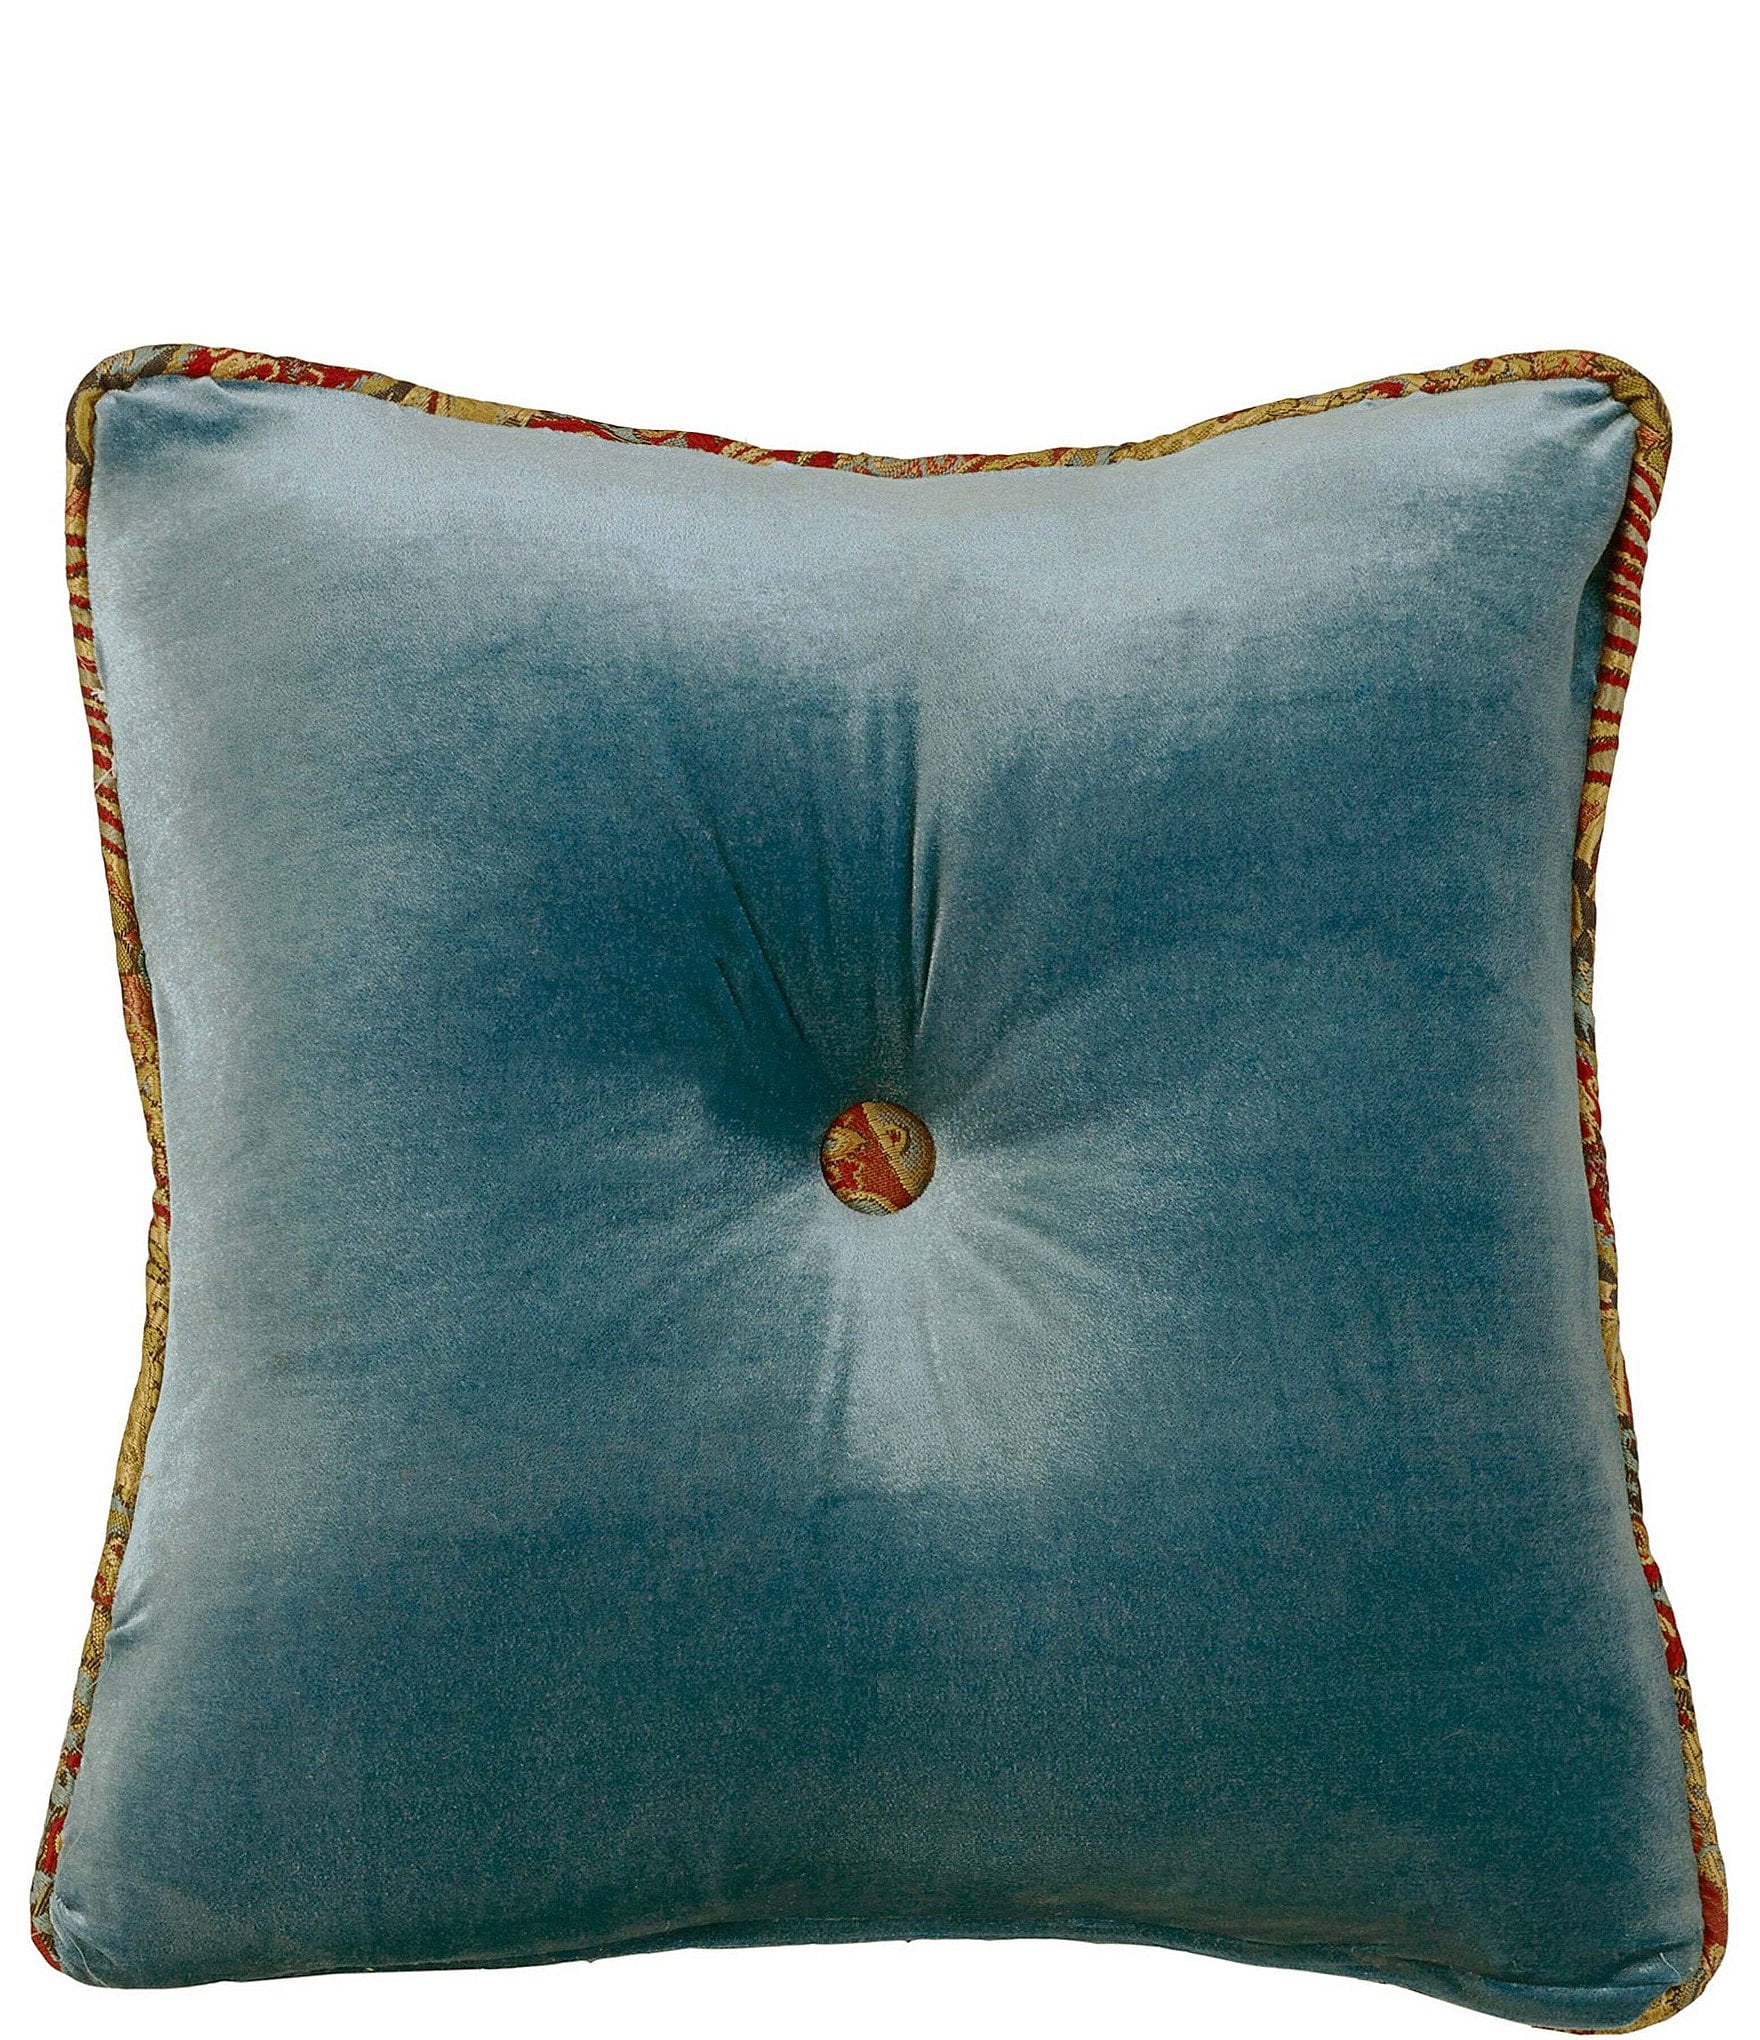 https://dimg.dillards.com/is/image/DillardsZoom/zoom/paseo-road-by-hiend-accents-san-angelo-solid-teal-velvet-paisley-button-tufted-square-decorative-pillow/00000000_zi_b026688b-d3c7-4fc4-a501-69ae4ccaa8d9.jpg